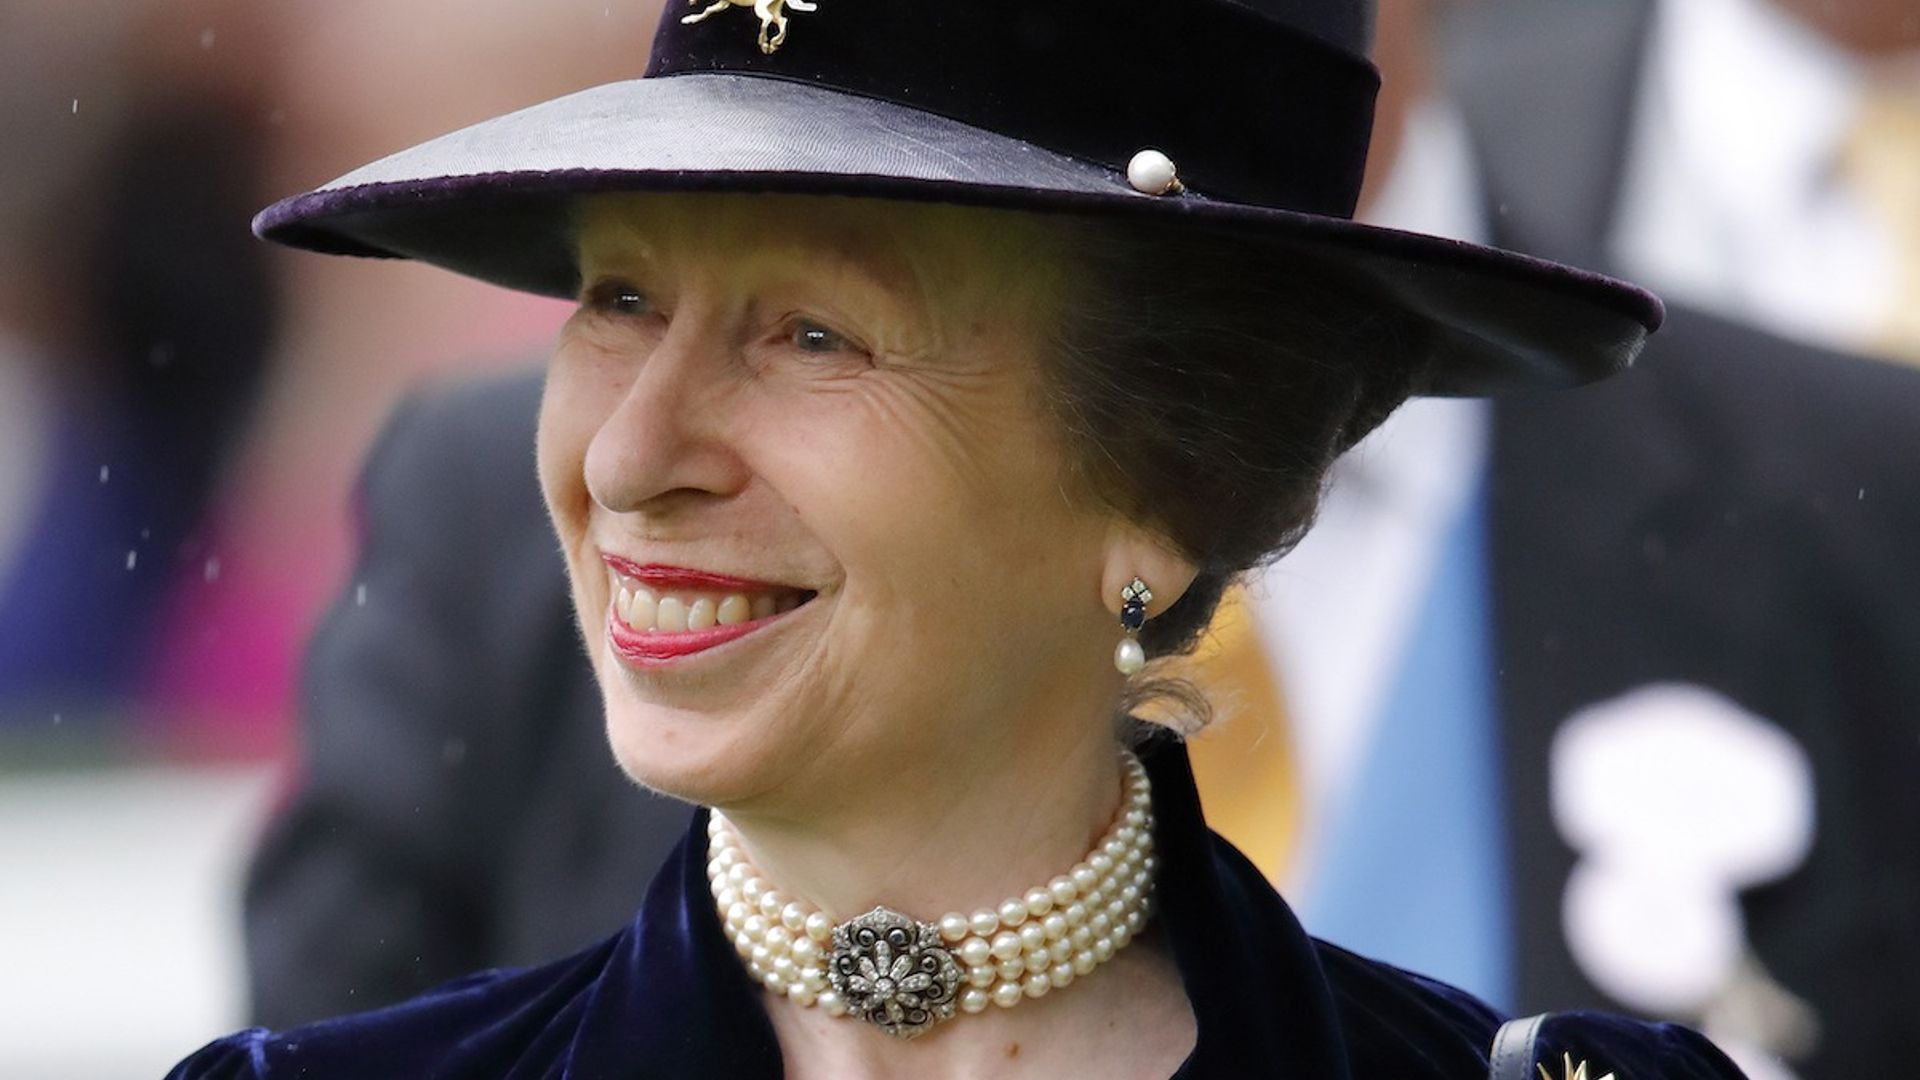 Princess Anne proudly rocks her military dress at St James's Palace ceremony